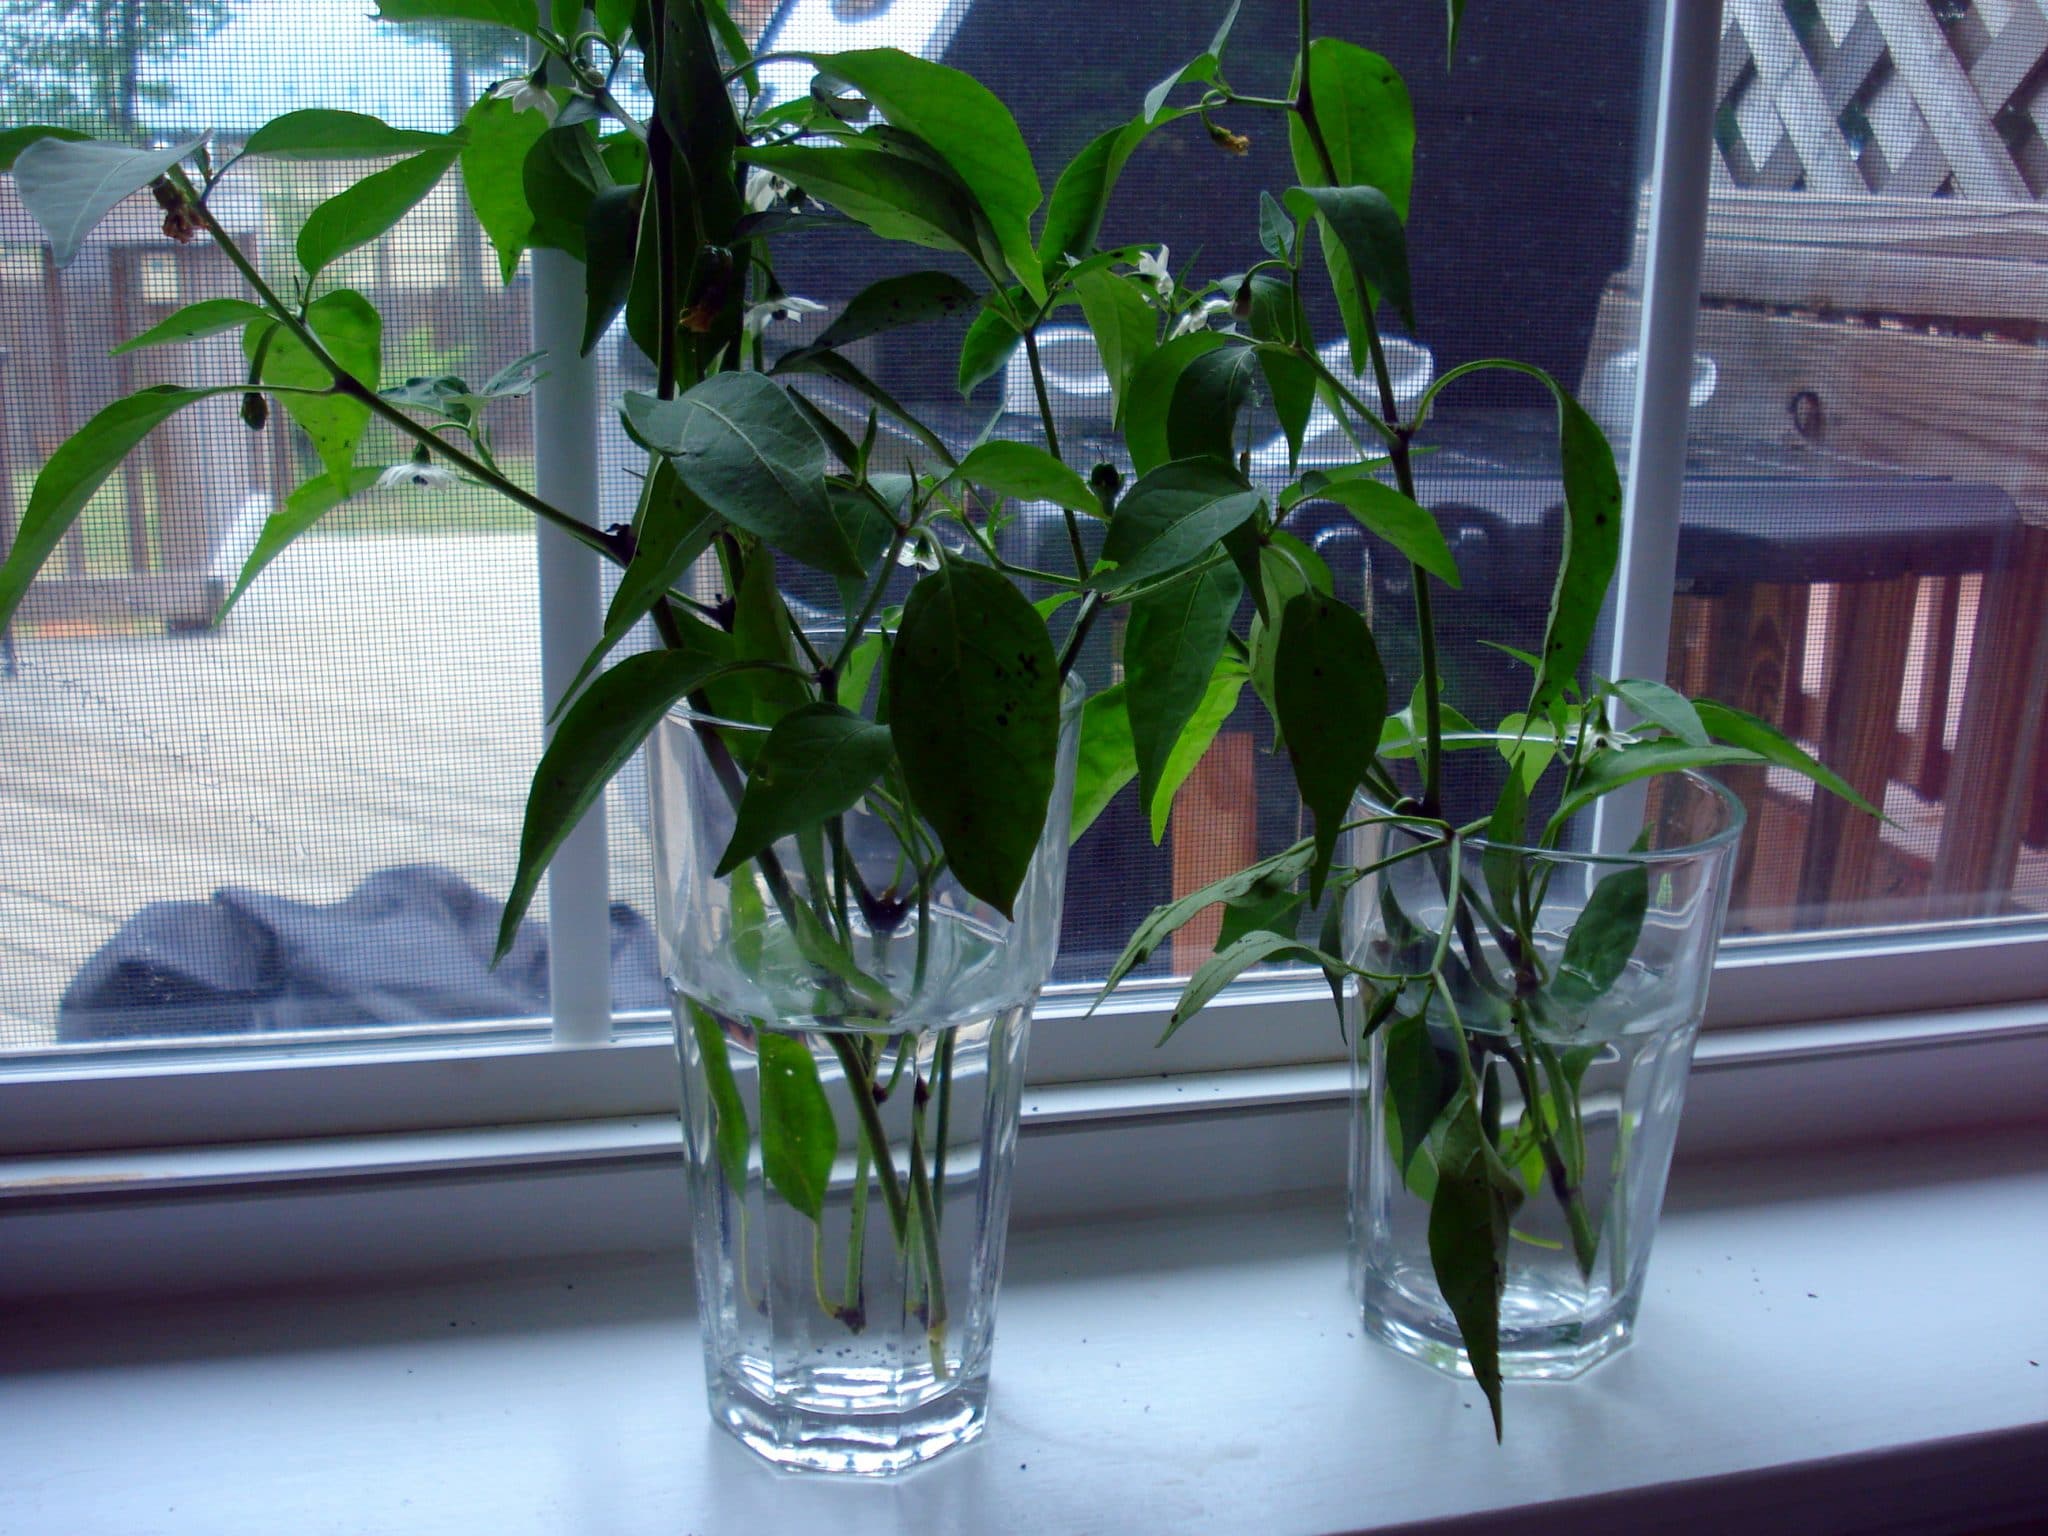 2 small cilantro plants growing in water glasses on window sill